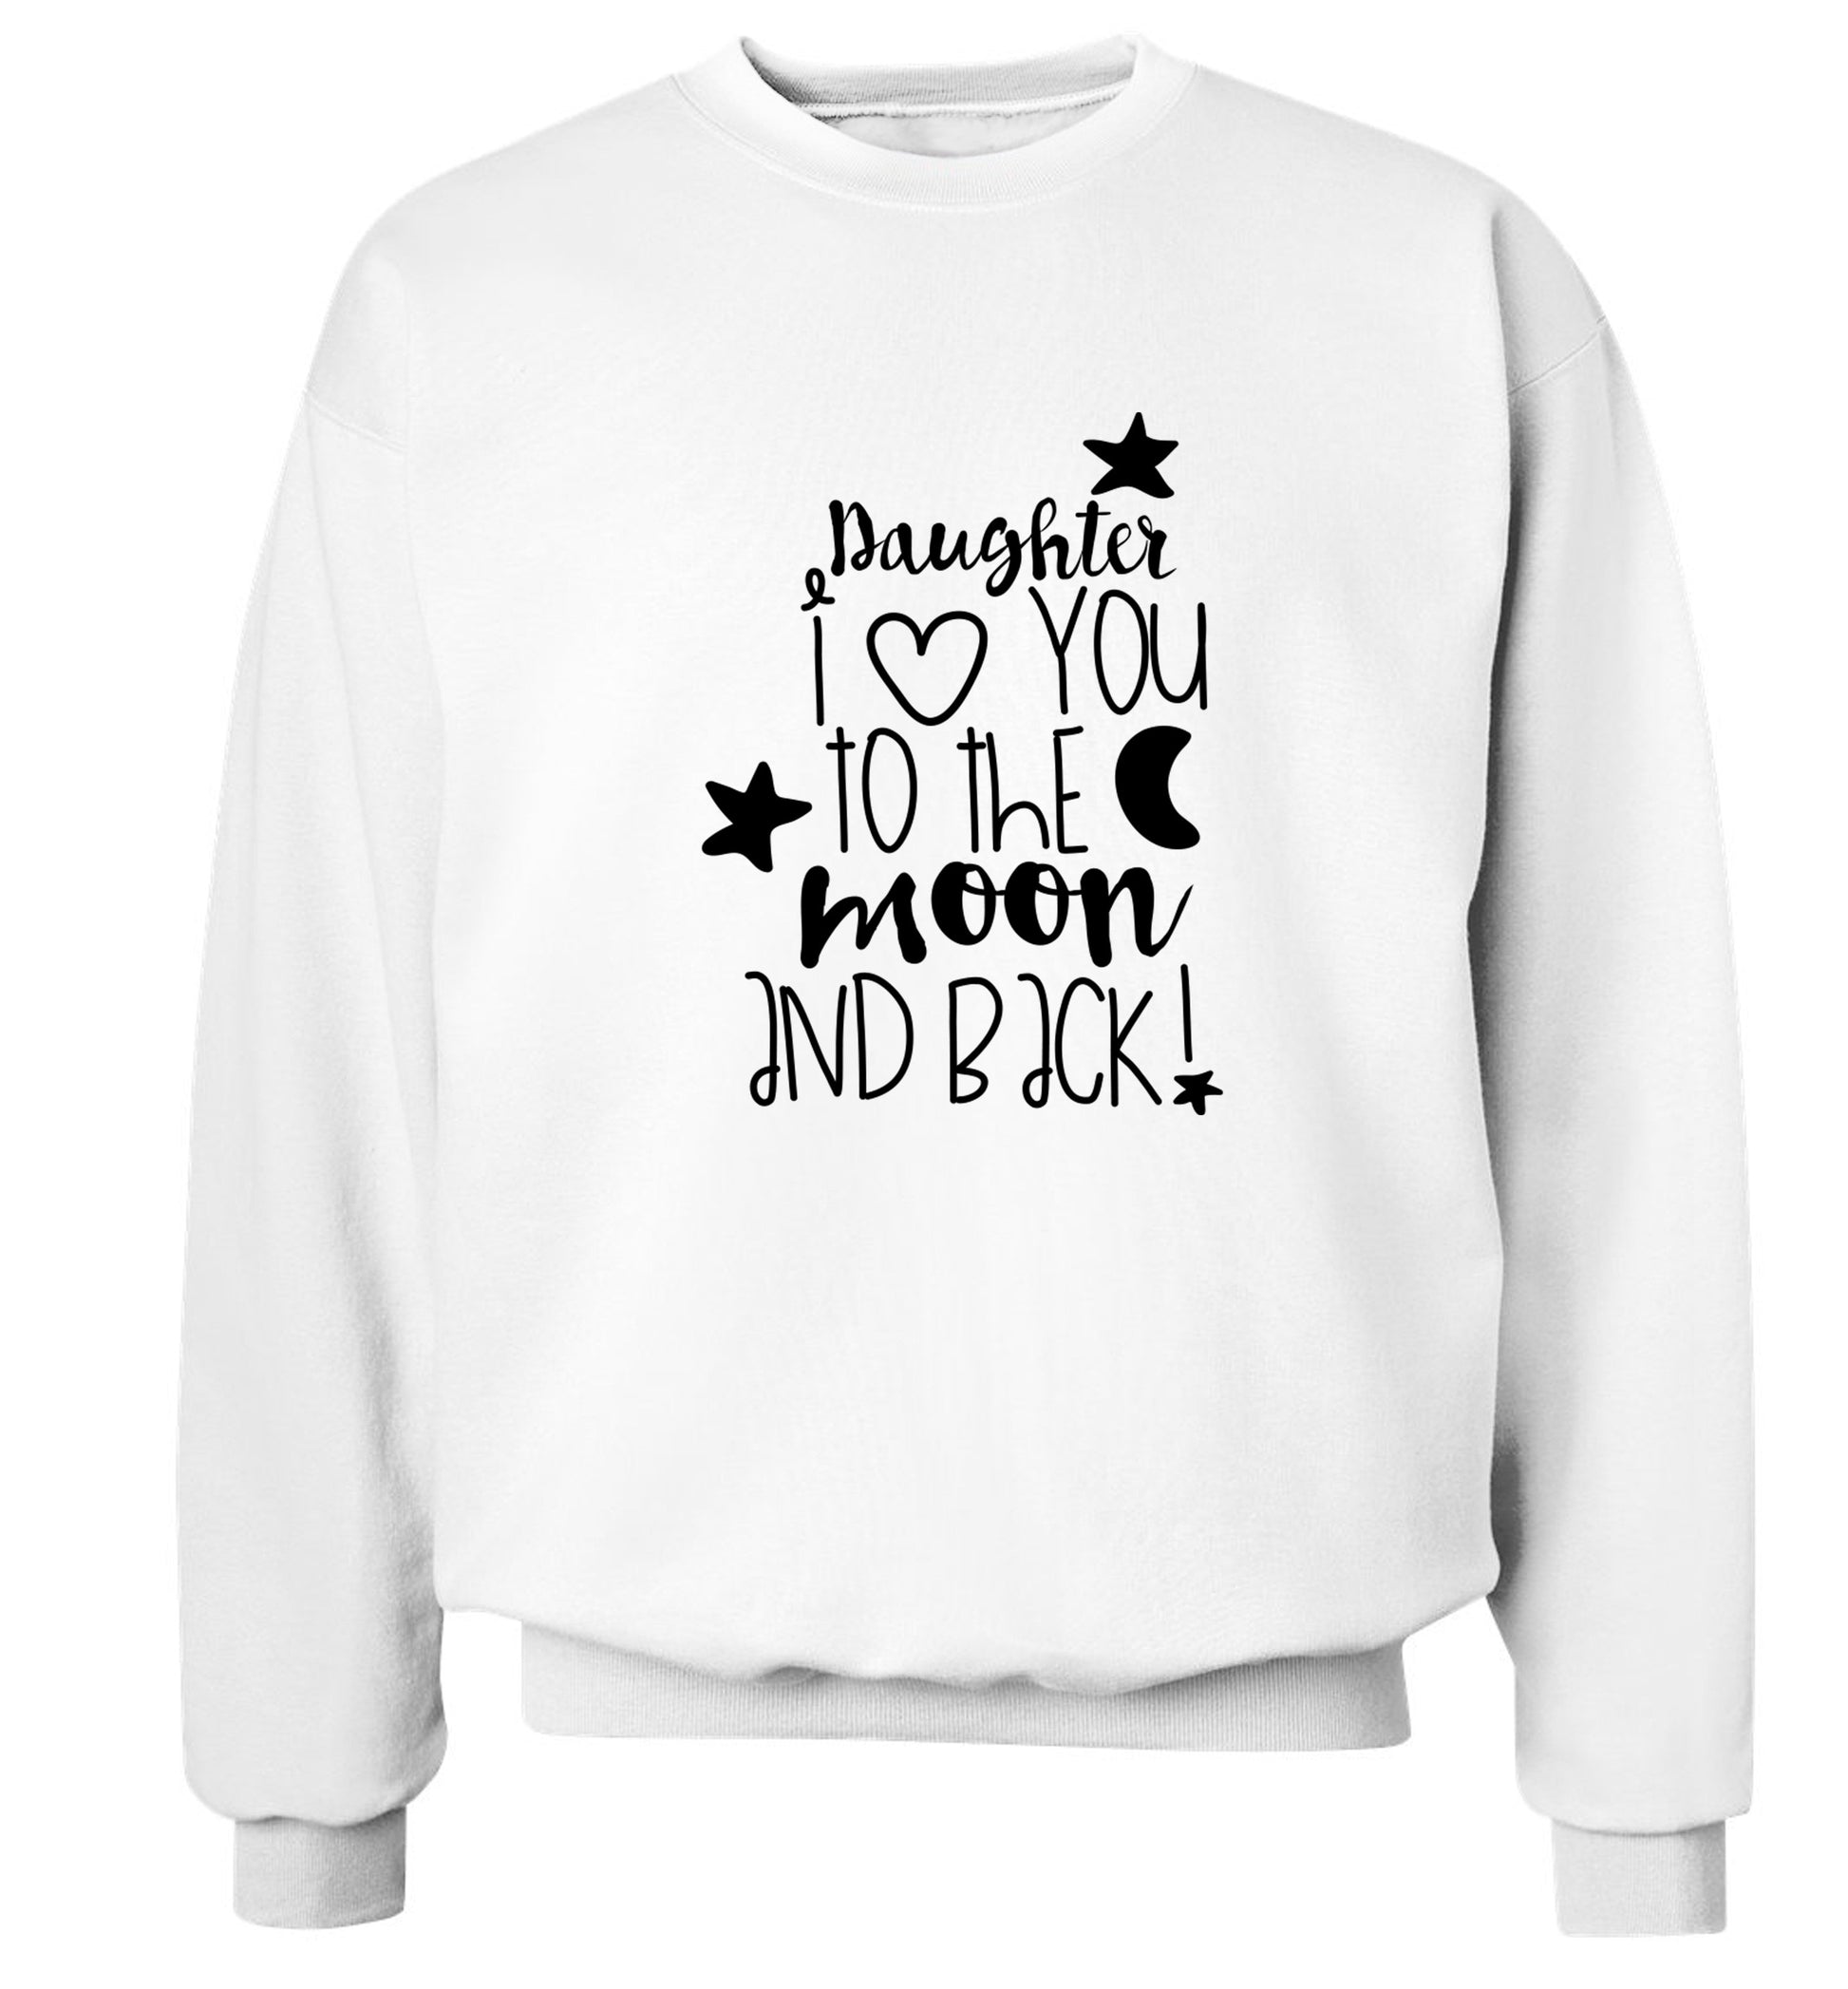 Daughter I love you to the moon and back Adult's unisex white  sweater 2XL